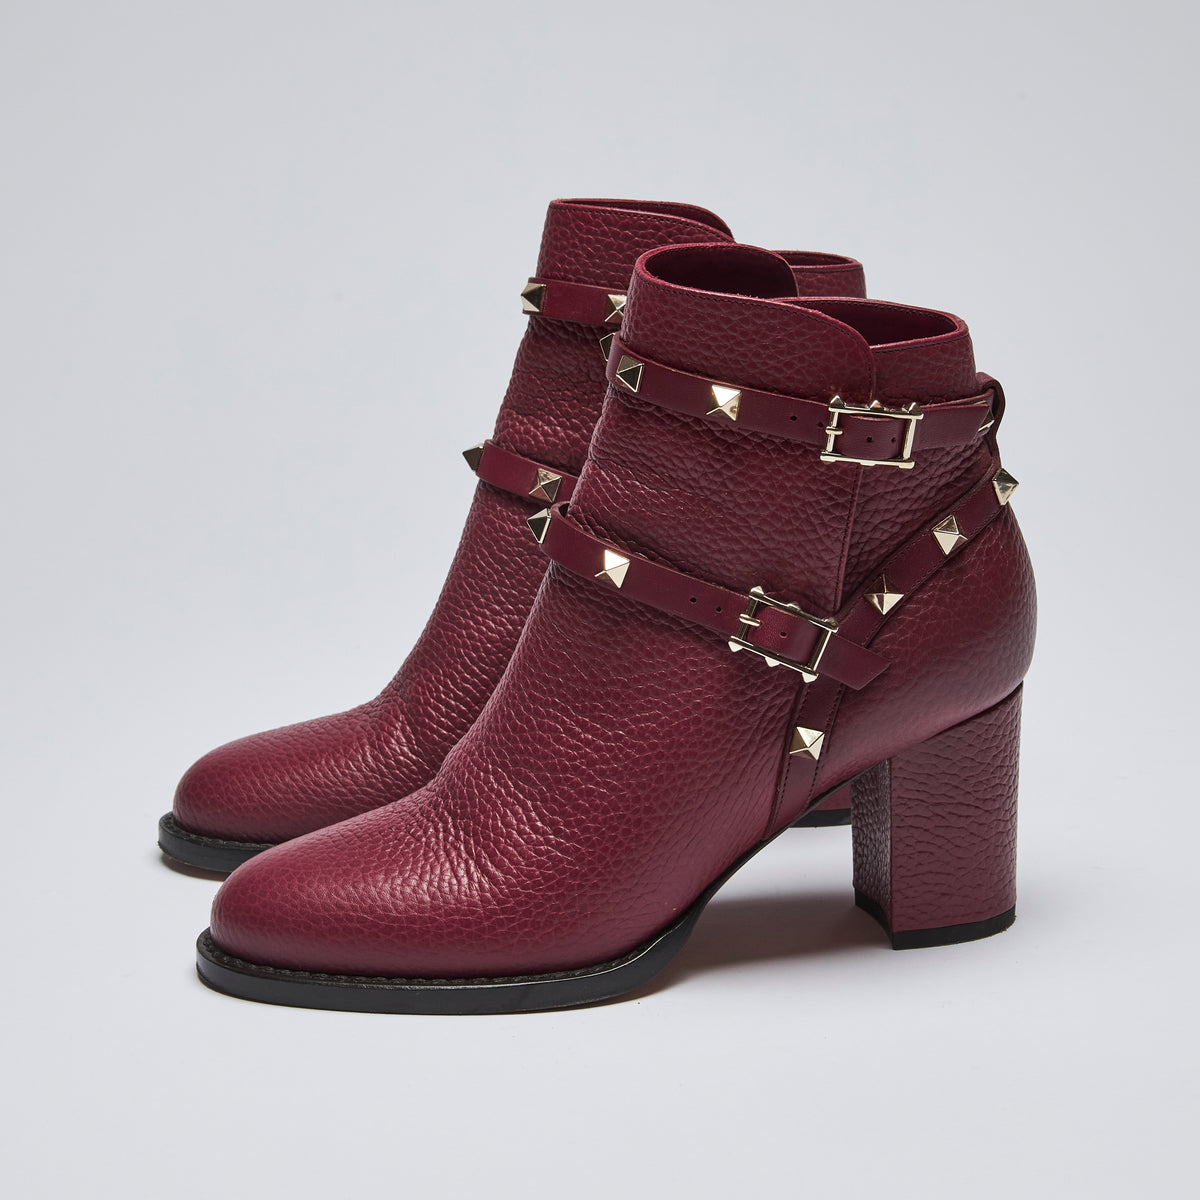 Pre-Loved Burgundy Grained Leather Ankle Boots with Studded Ankle Straps.(side)